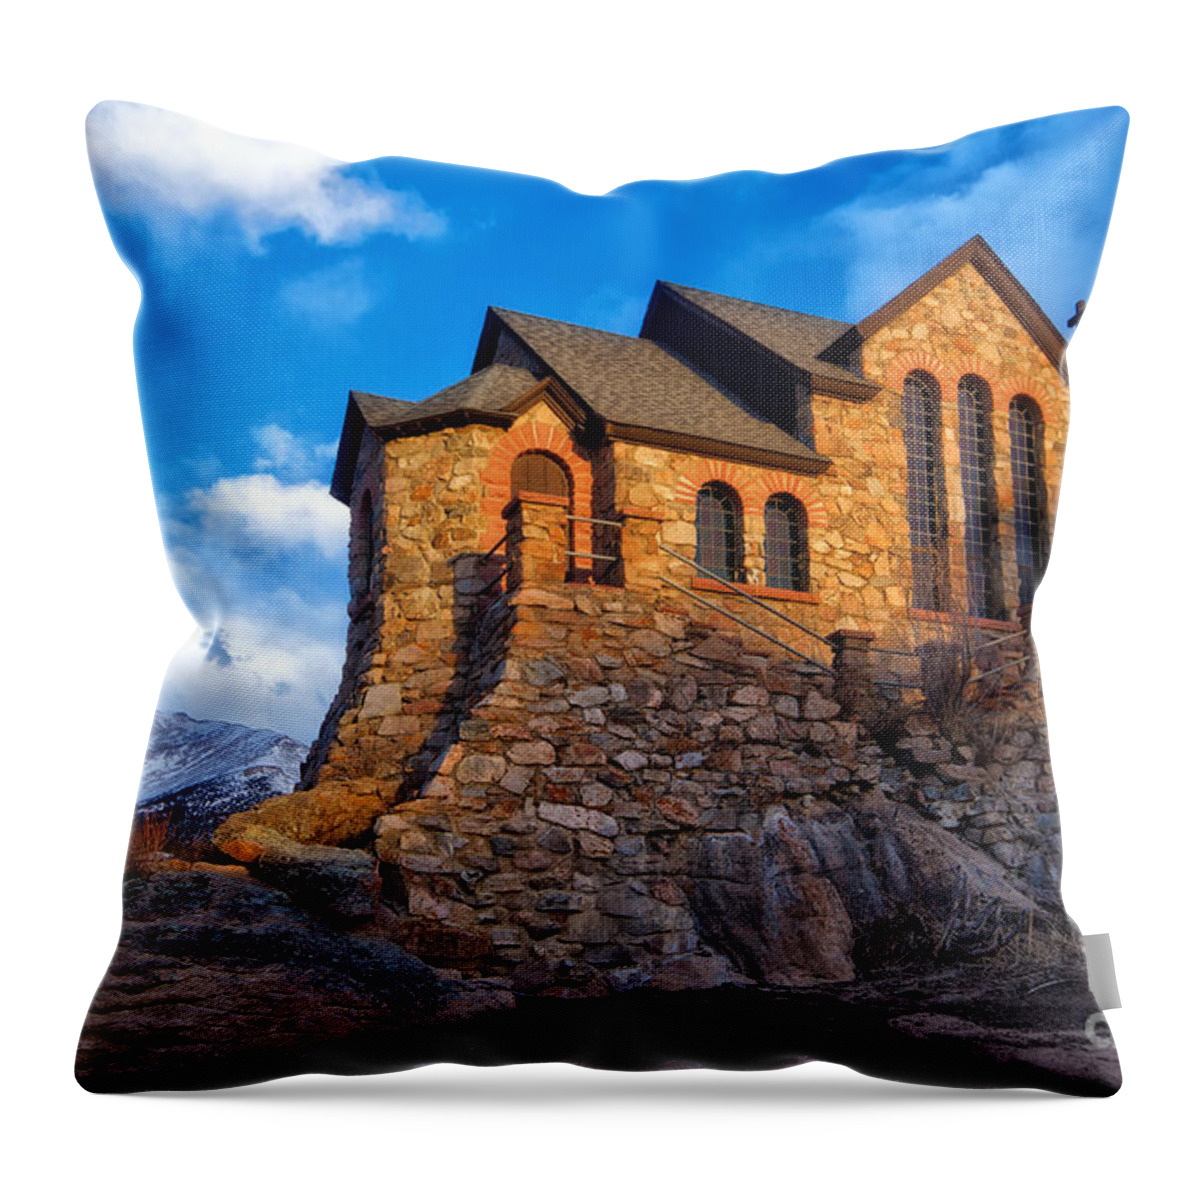 St Malo Throw Pillow featuring the photograph St Malo Church, Allenspark Colorado by Ronda Kimbrow